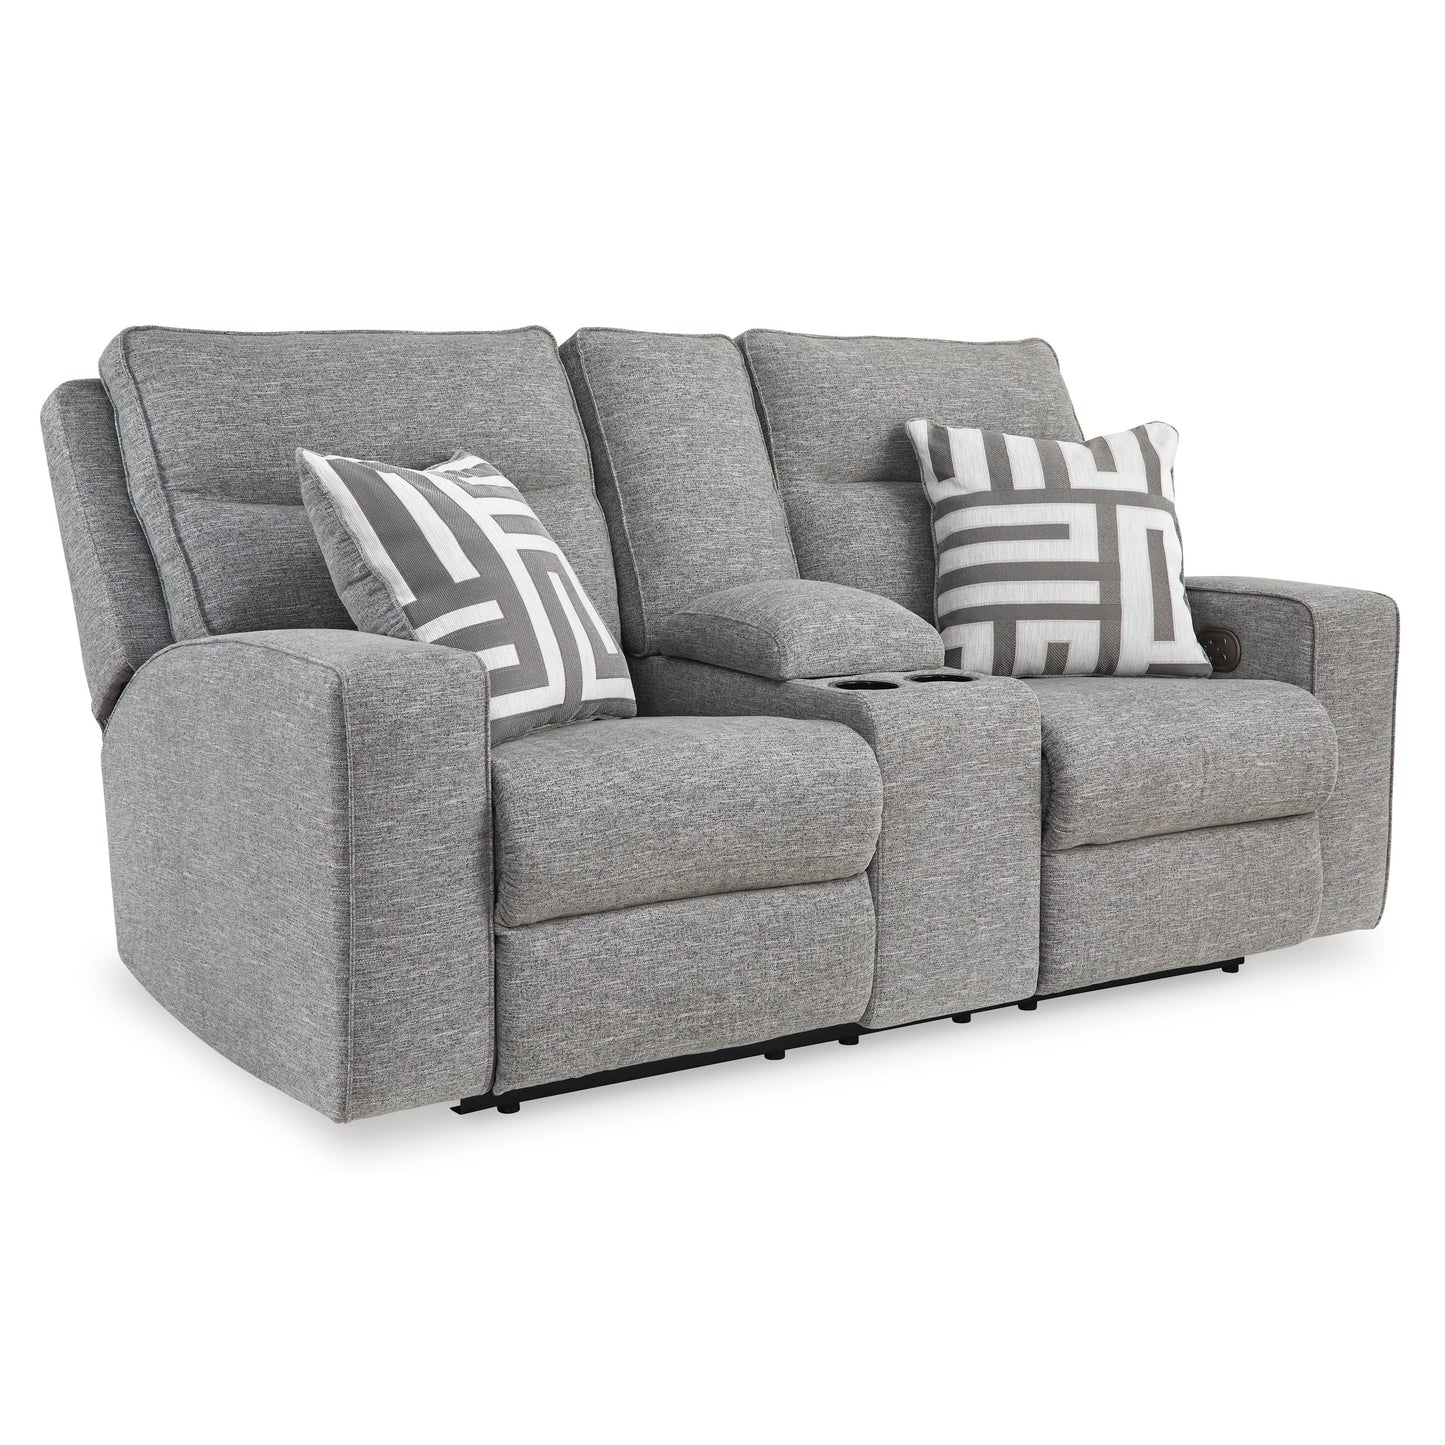 Signature Design by Ashley Biscoe Fabric Loveseat 9050318 IMAGE 1